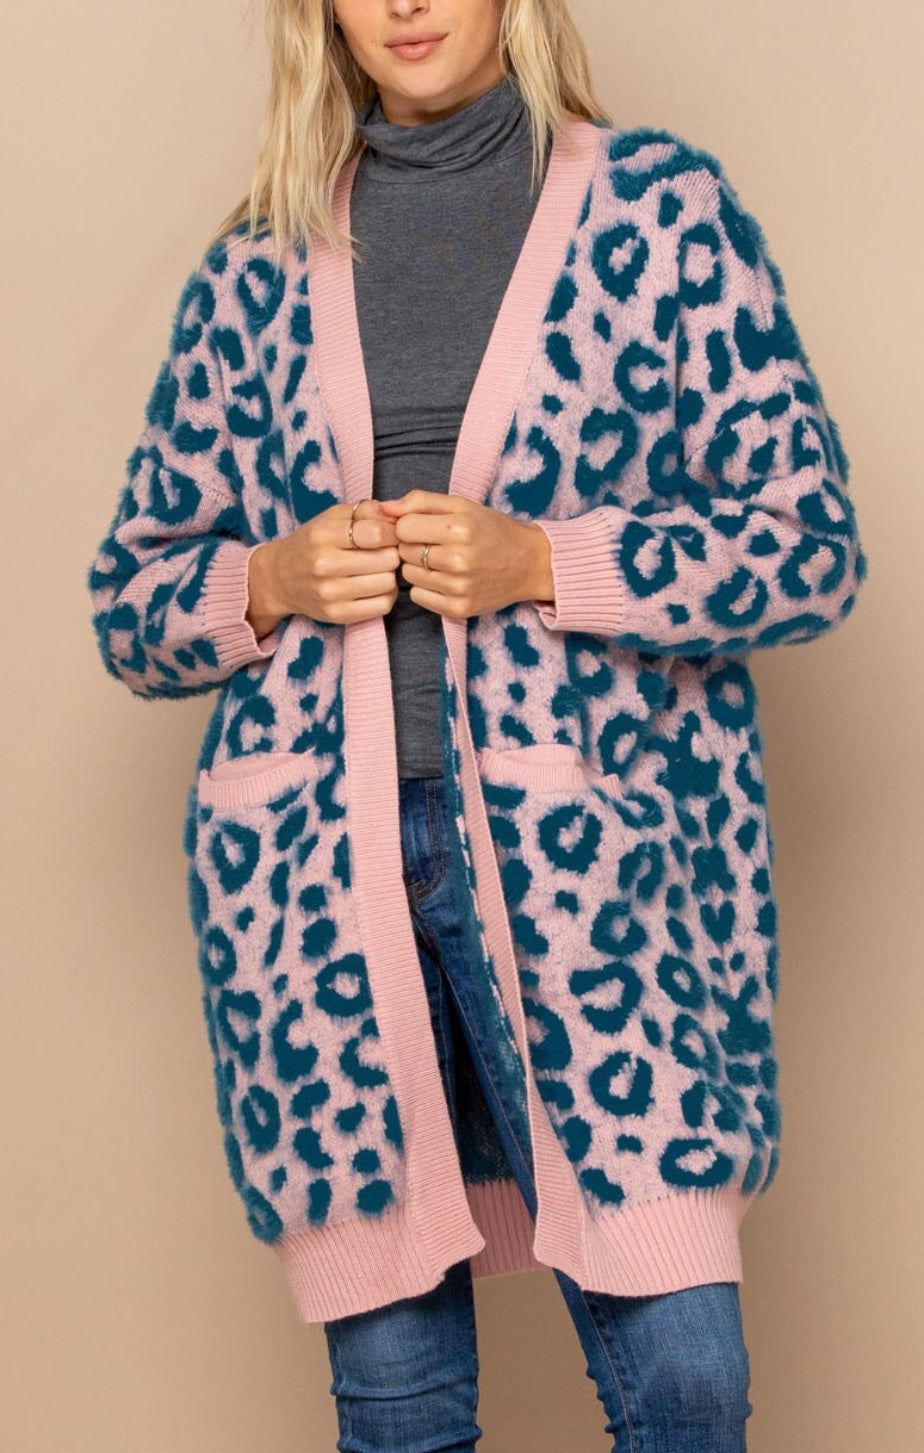 Pink and Blue Fuzzy Leopard Print Long Open Cardigan